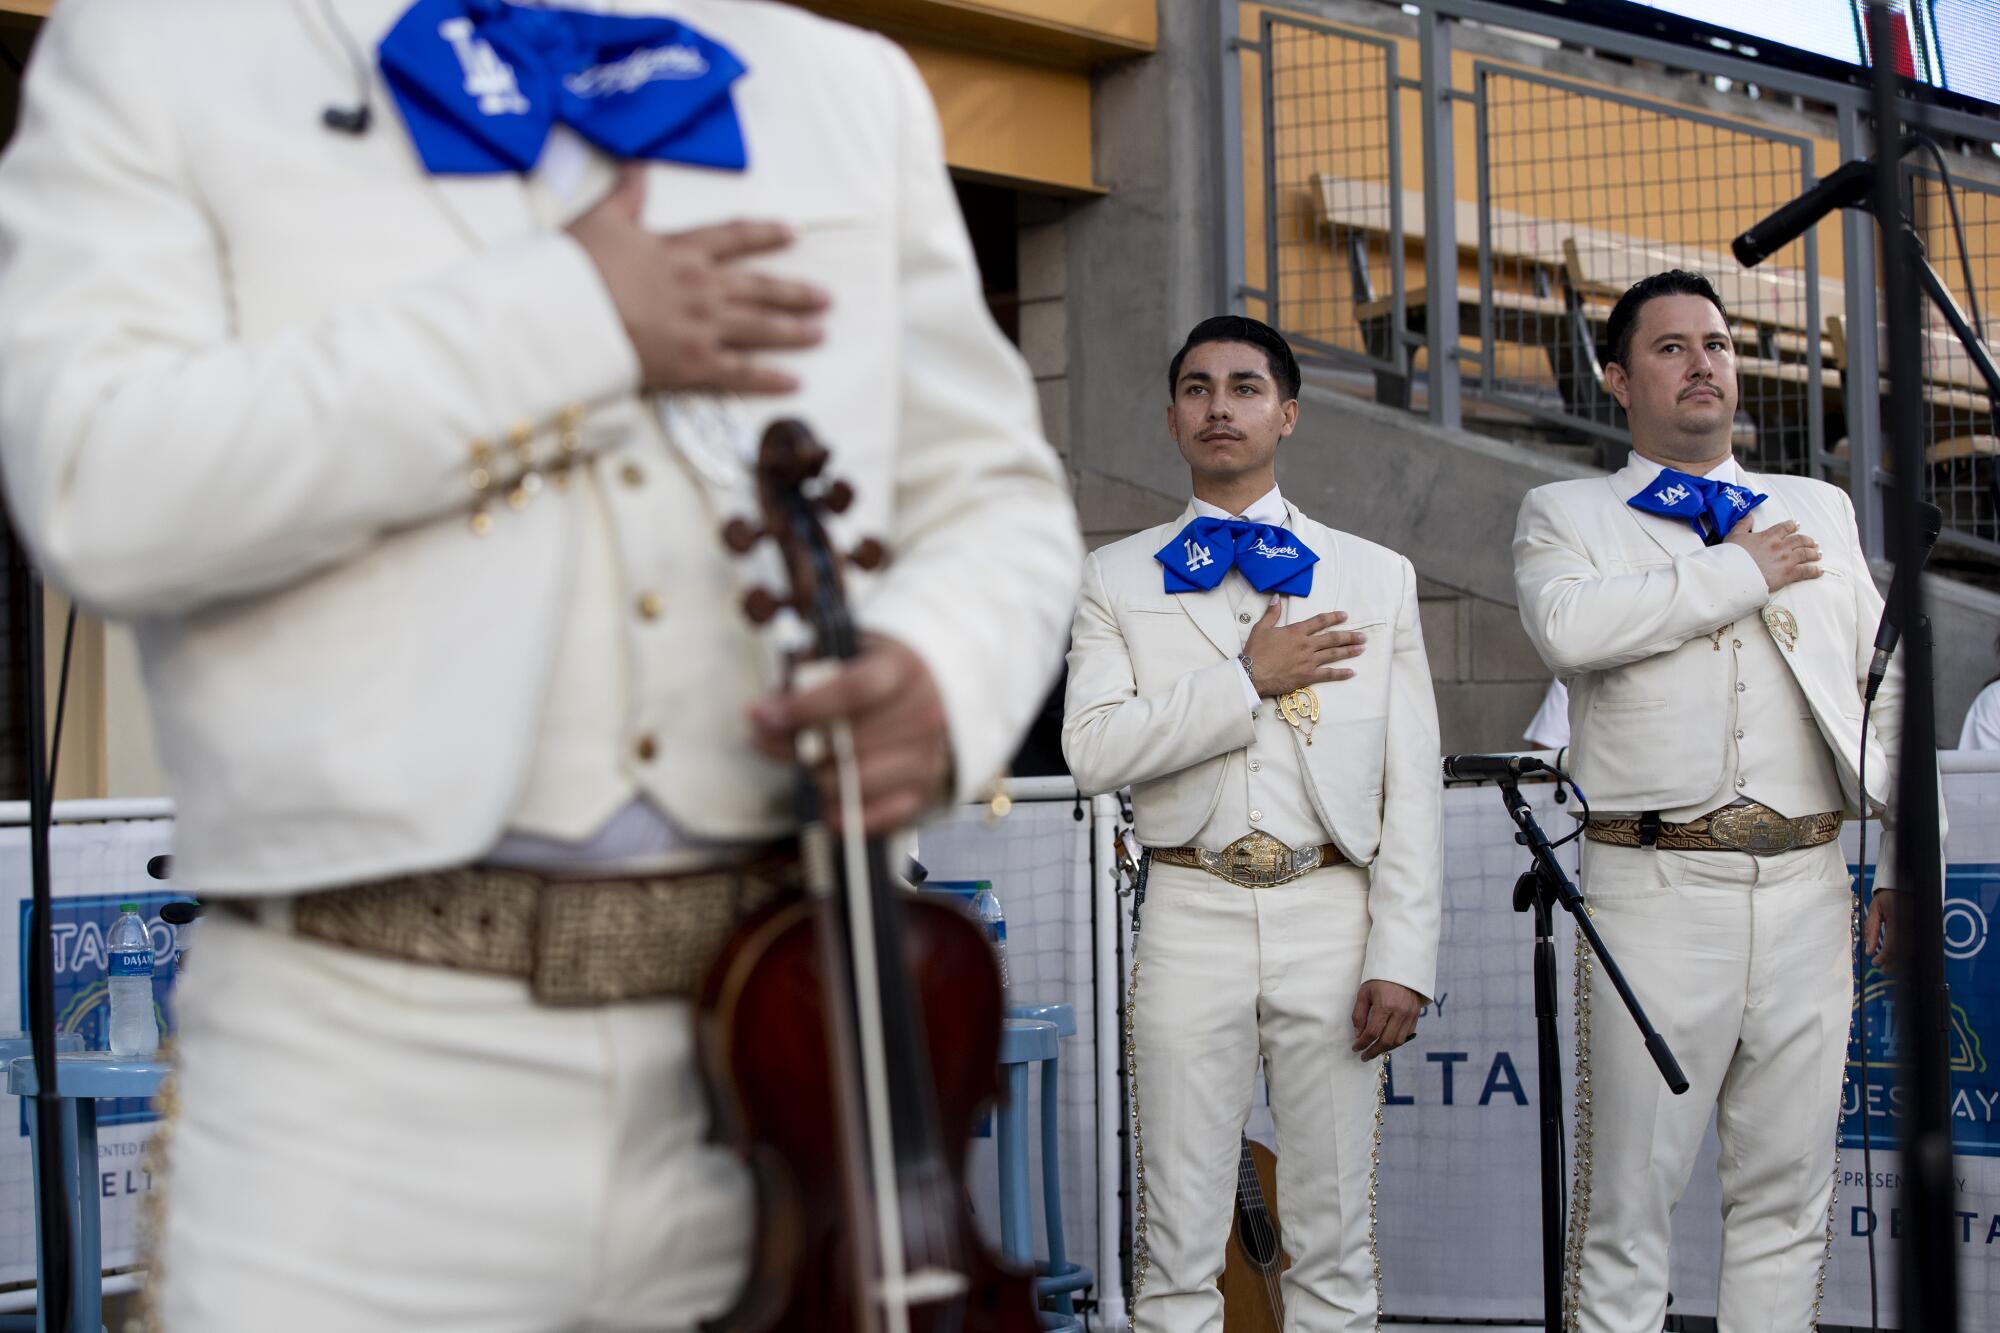 Mariachi Garibaldi de Jaime Cuellar members place their hands over their hearts during the singing of the National Anthem